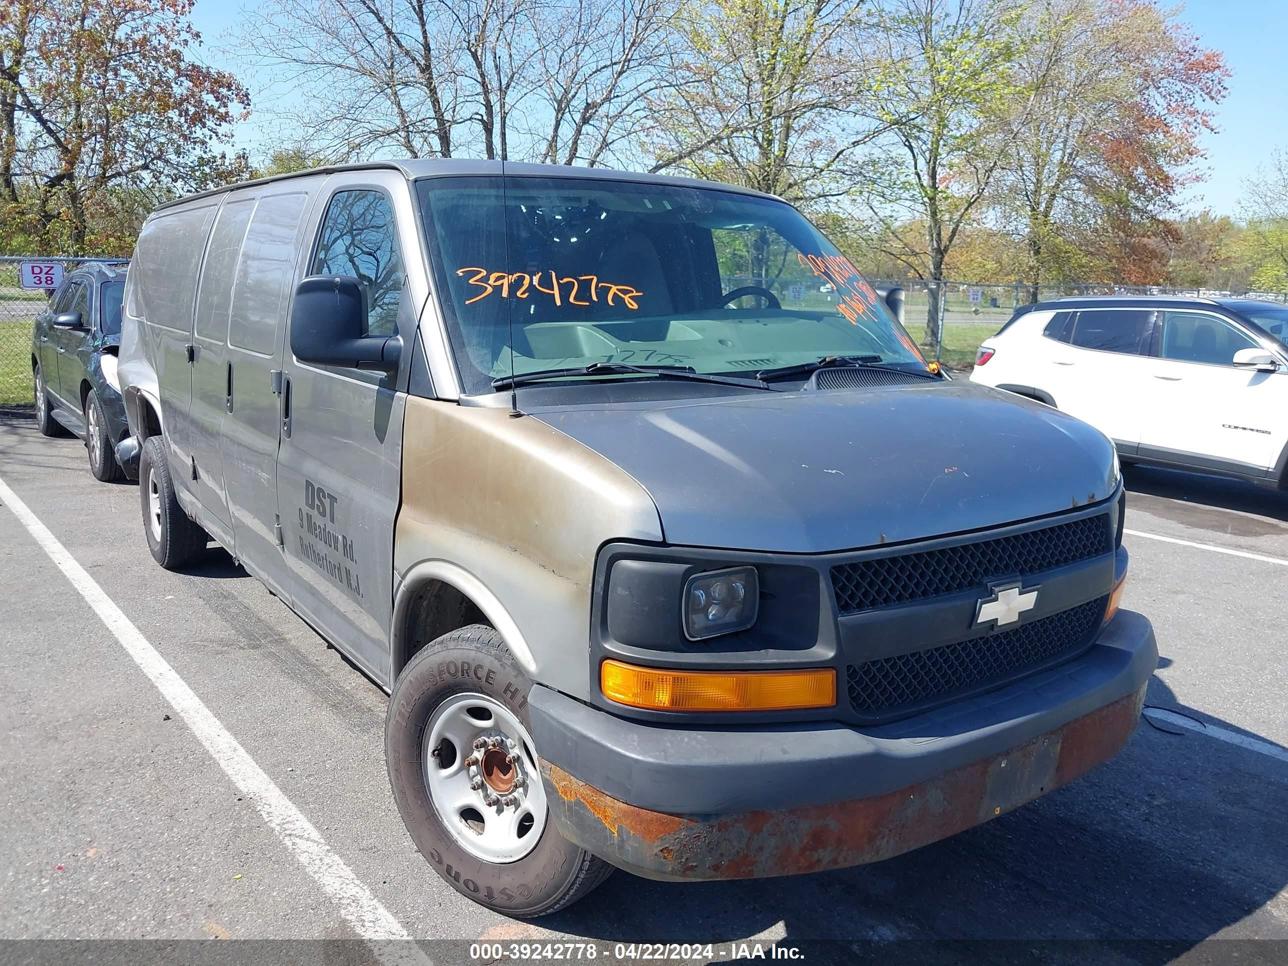 vin: 1GCGG29C481163419 1GCGG29C481163419 2008 chevrolet express 4800 for Sale in 07726, 230 Pension Rd, Englishtown, New Jersey, USA